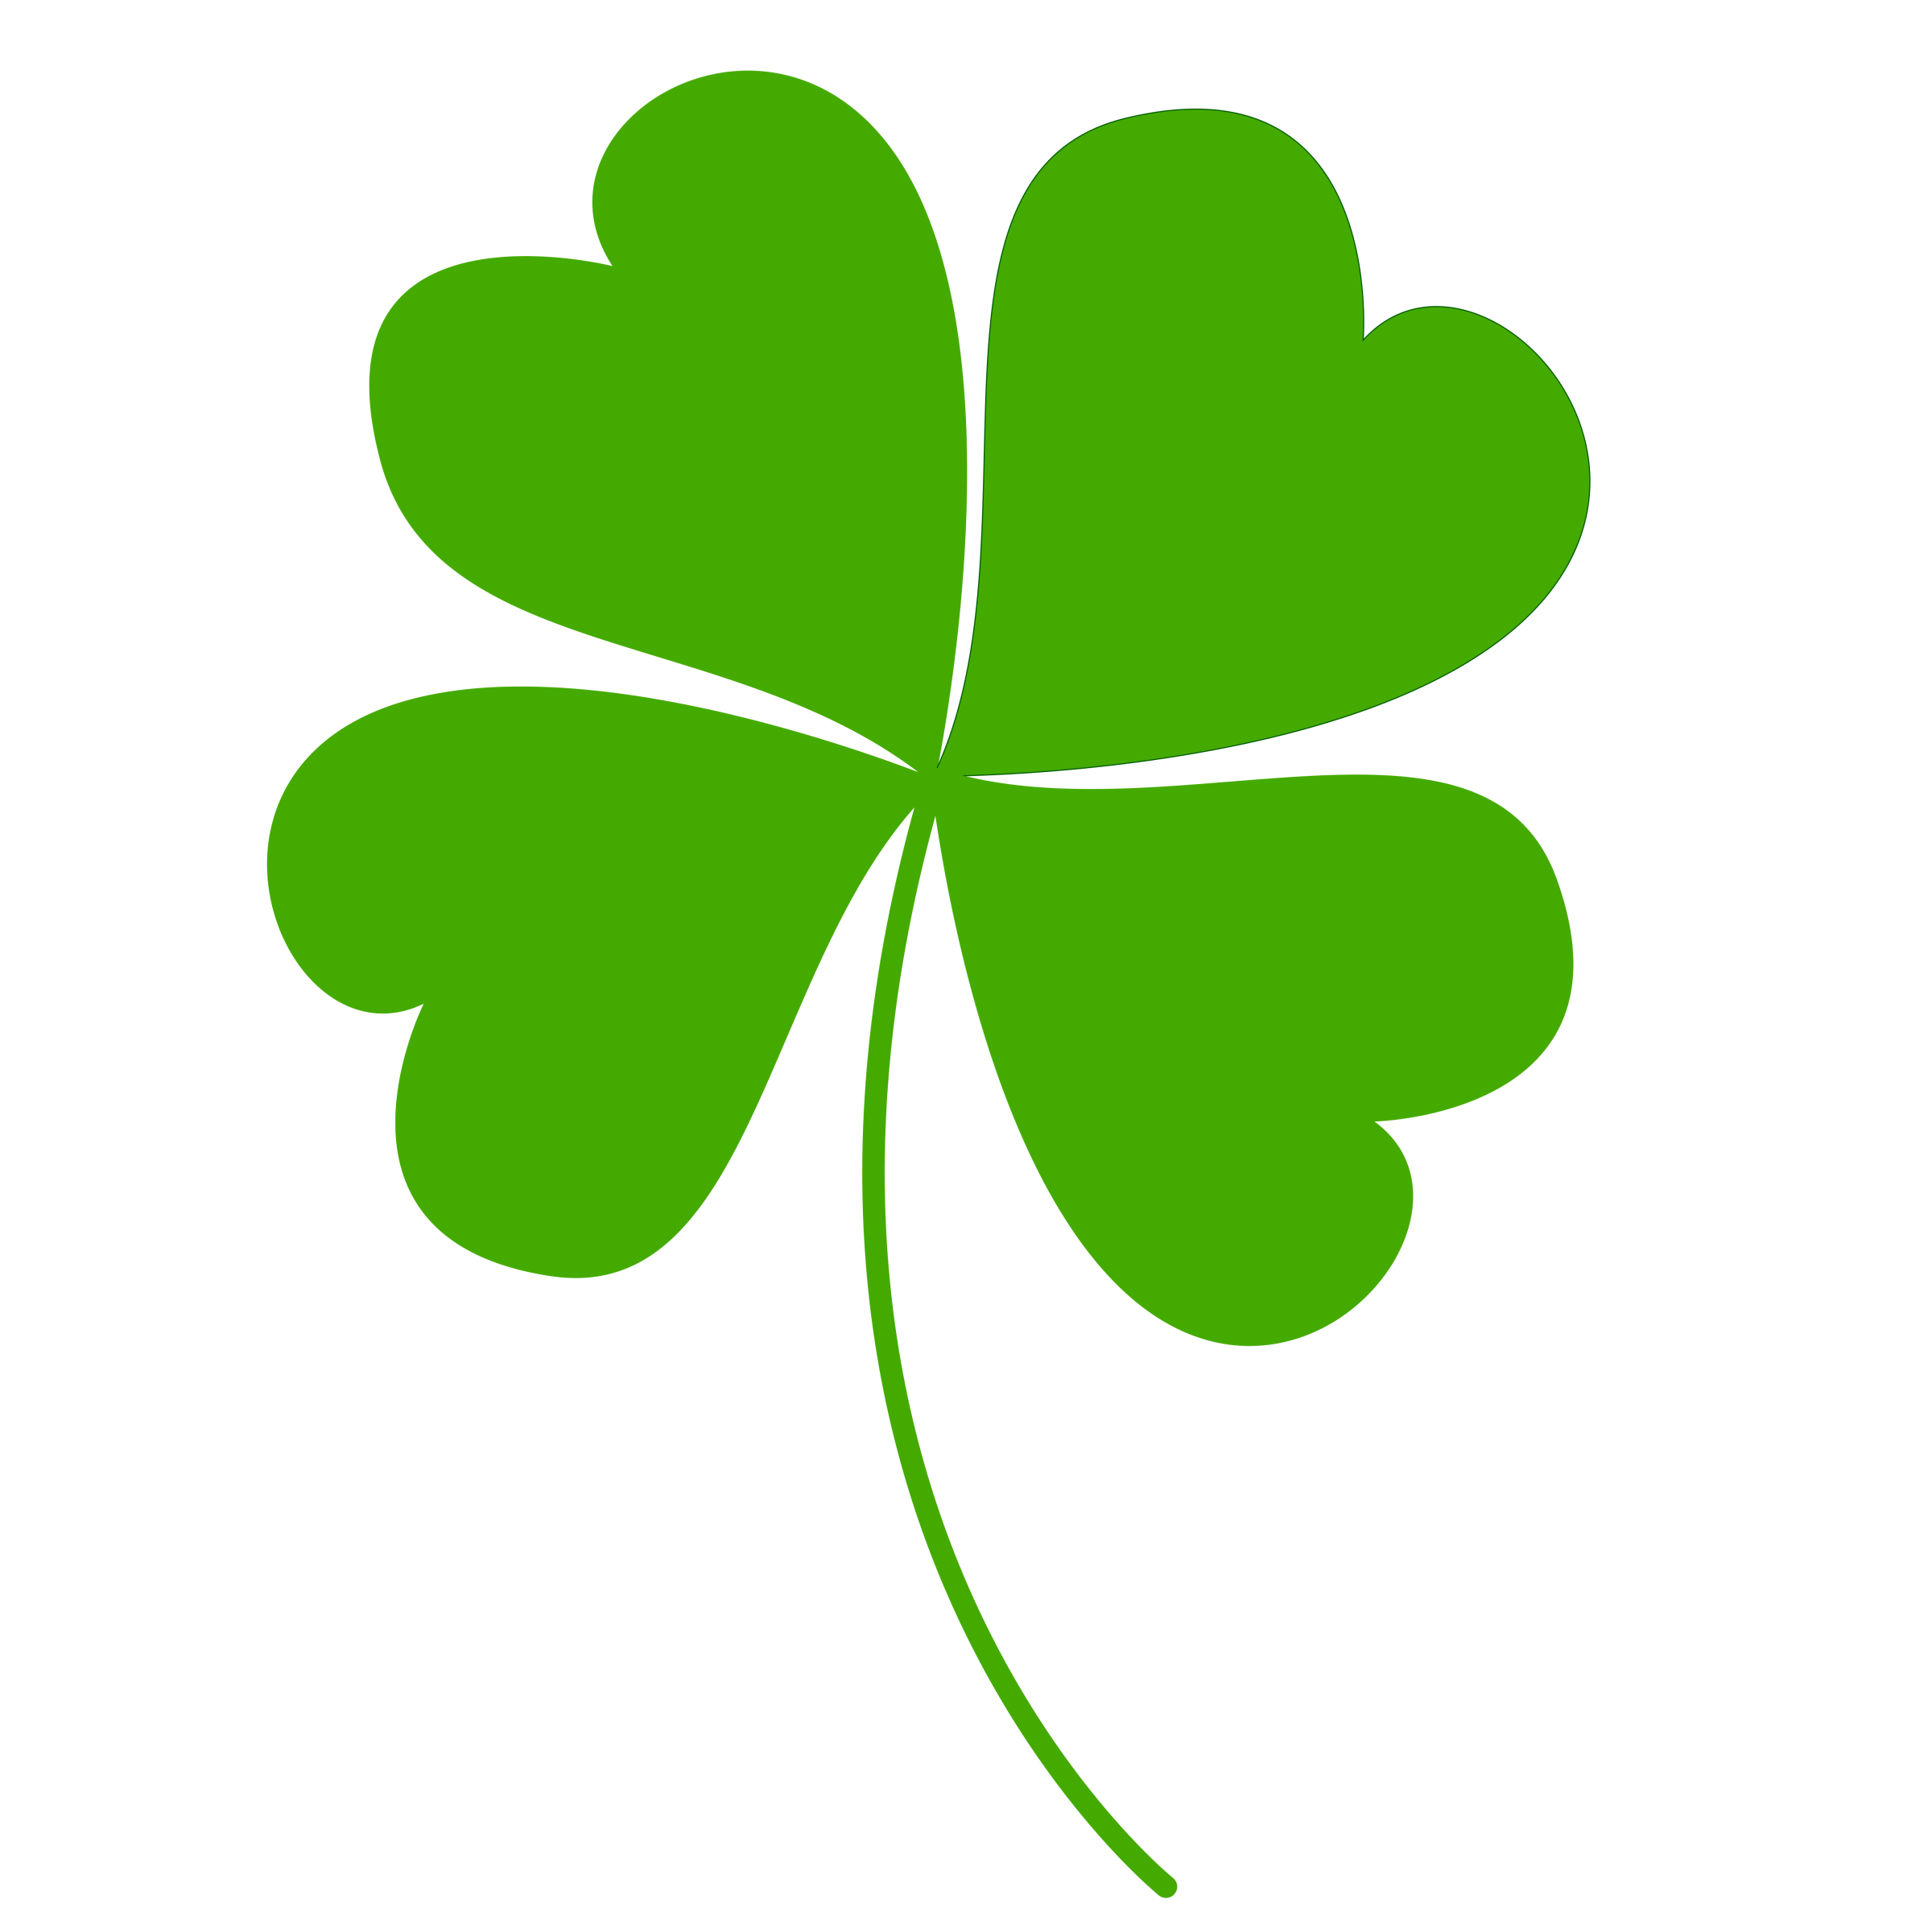 PNG File Name: Clover